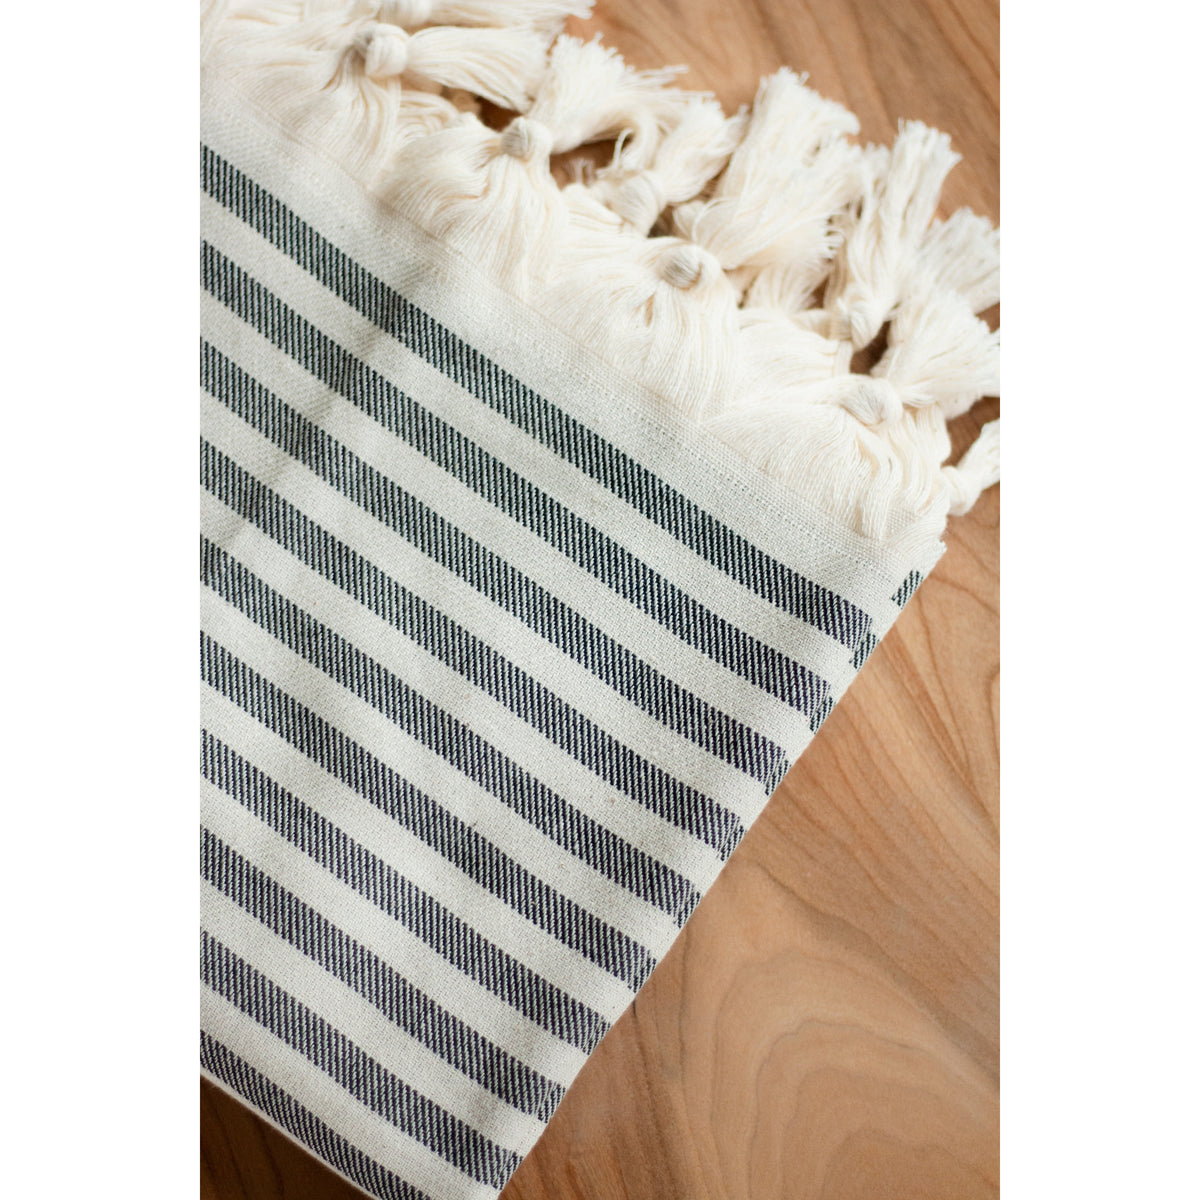 Oversized Turkish Bath and Beach Towels - Abyss Stripe